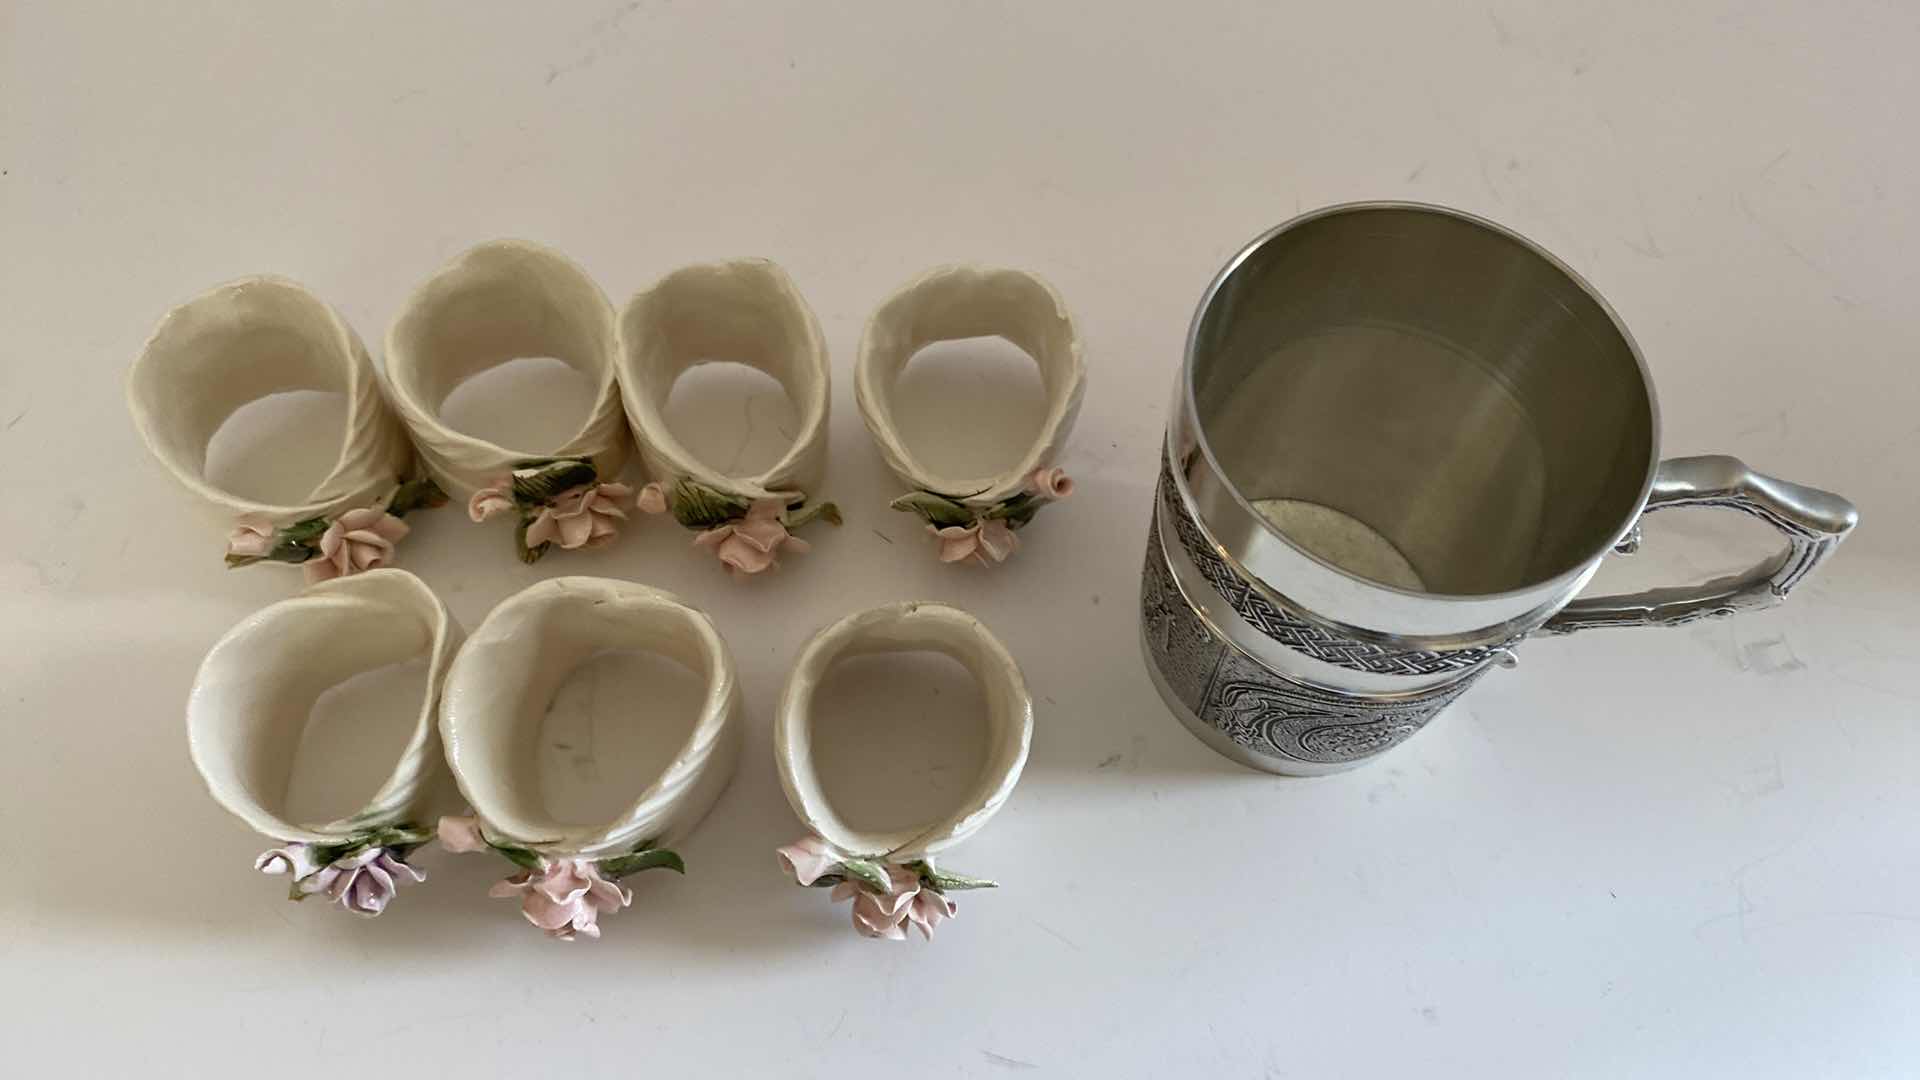 Photo 2 of 7 CERAMIC NAPKIN RINGS AND CUP FROM IRELAND